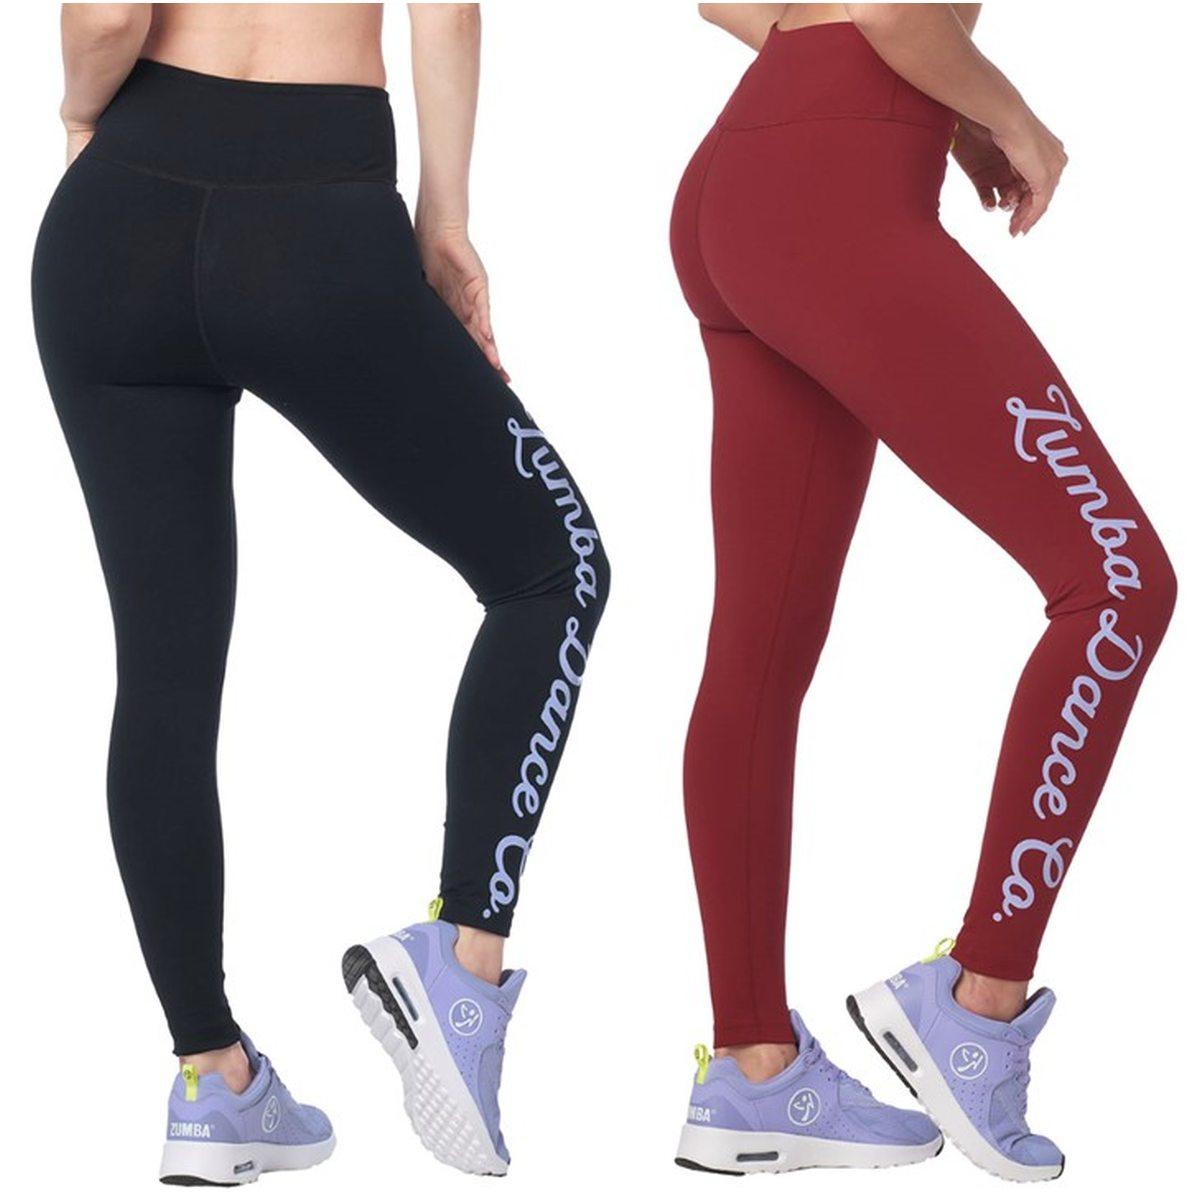 Zumba Dance Co. Laced Up Waistband Ankle Leggings